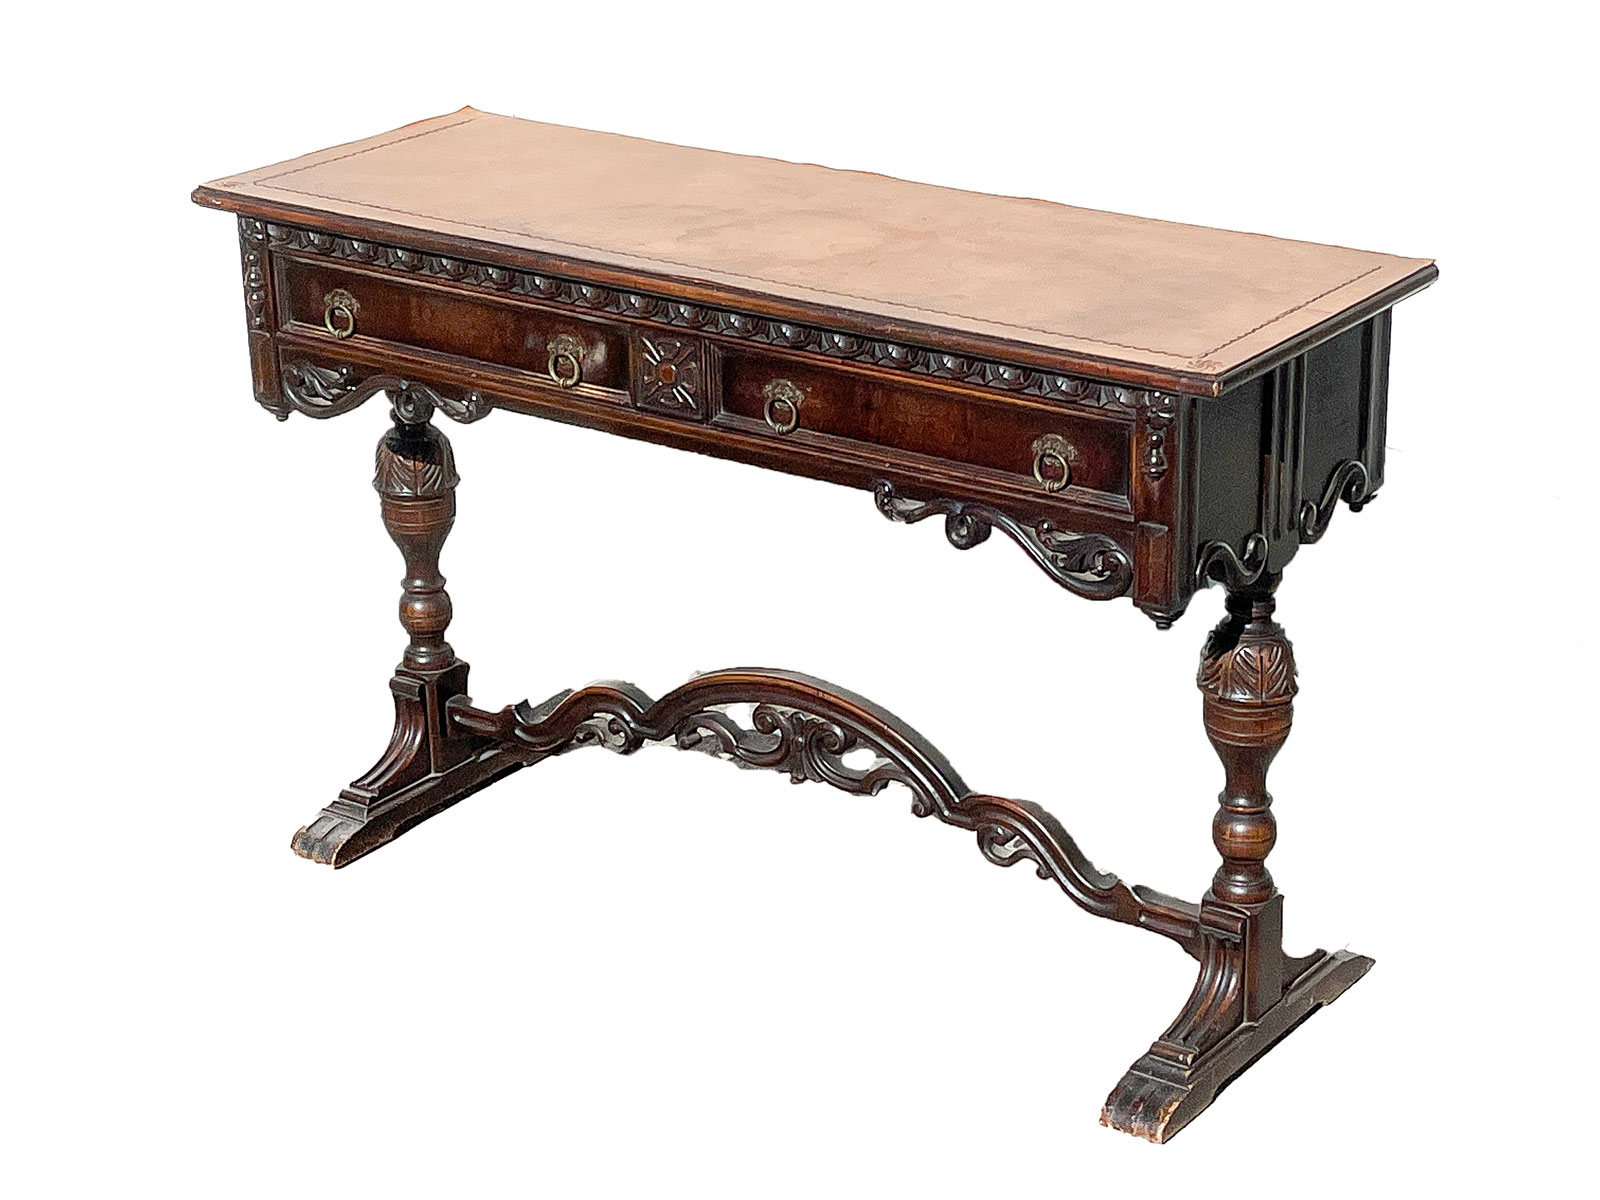 CARVED LEATHER TOP HALL TABLE/DESK: